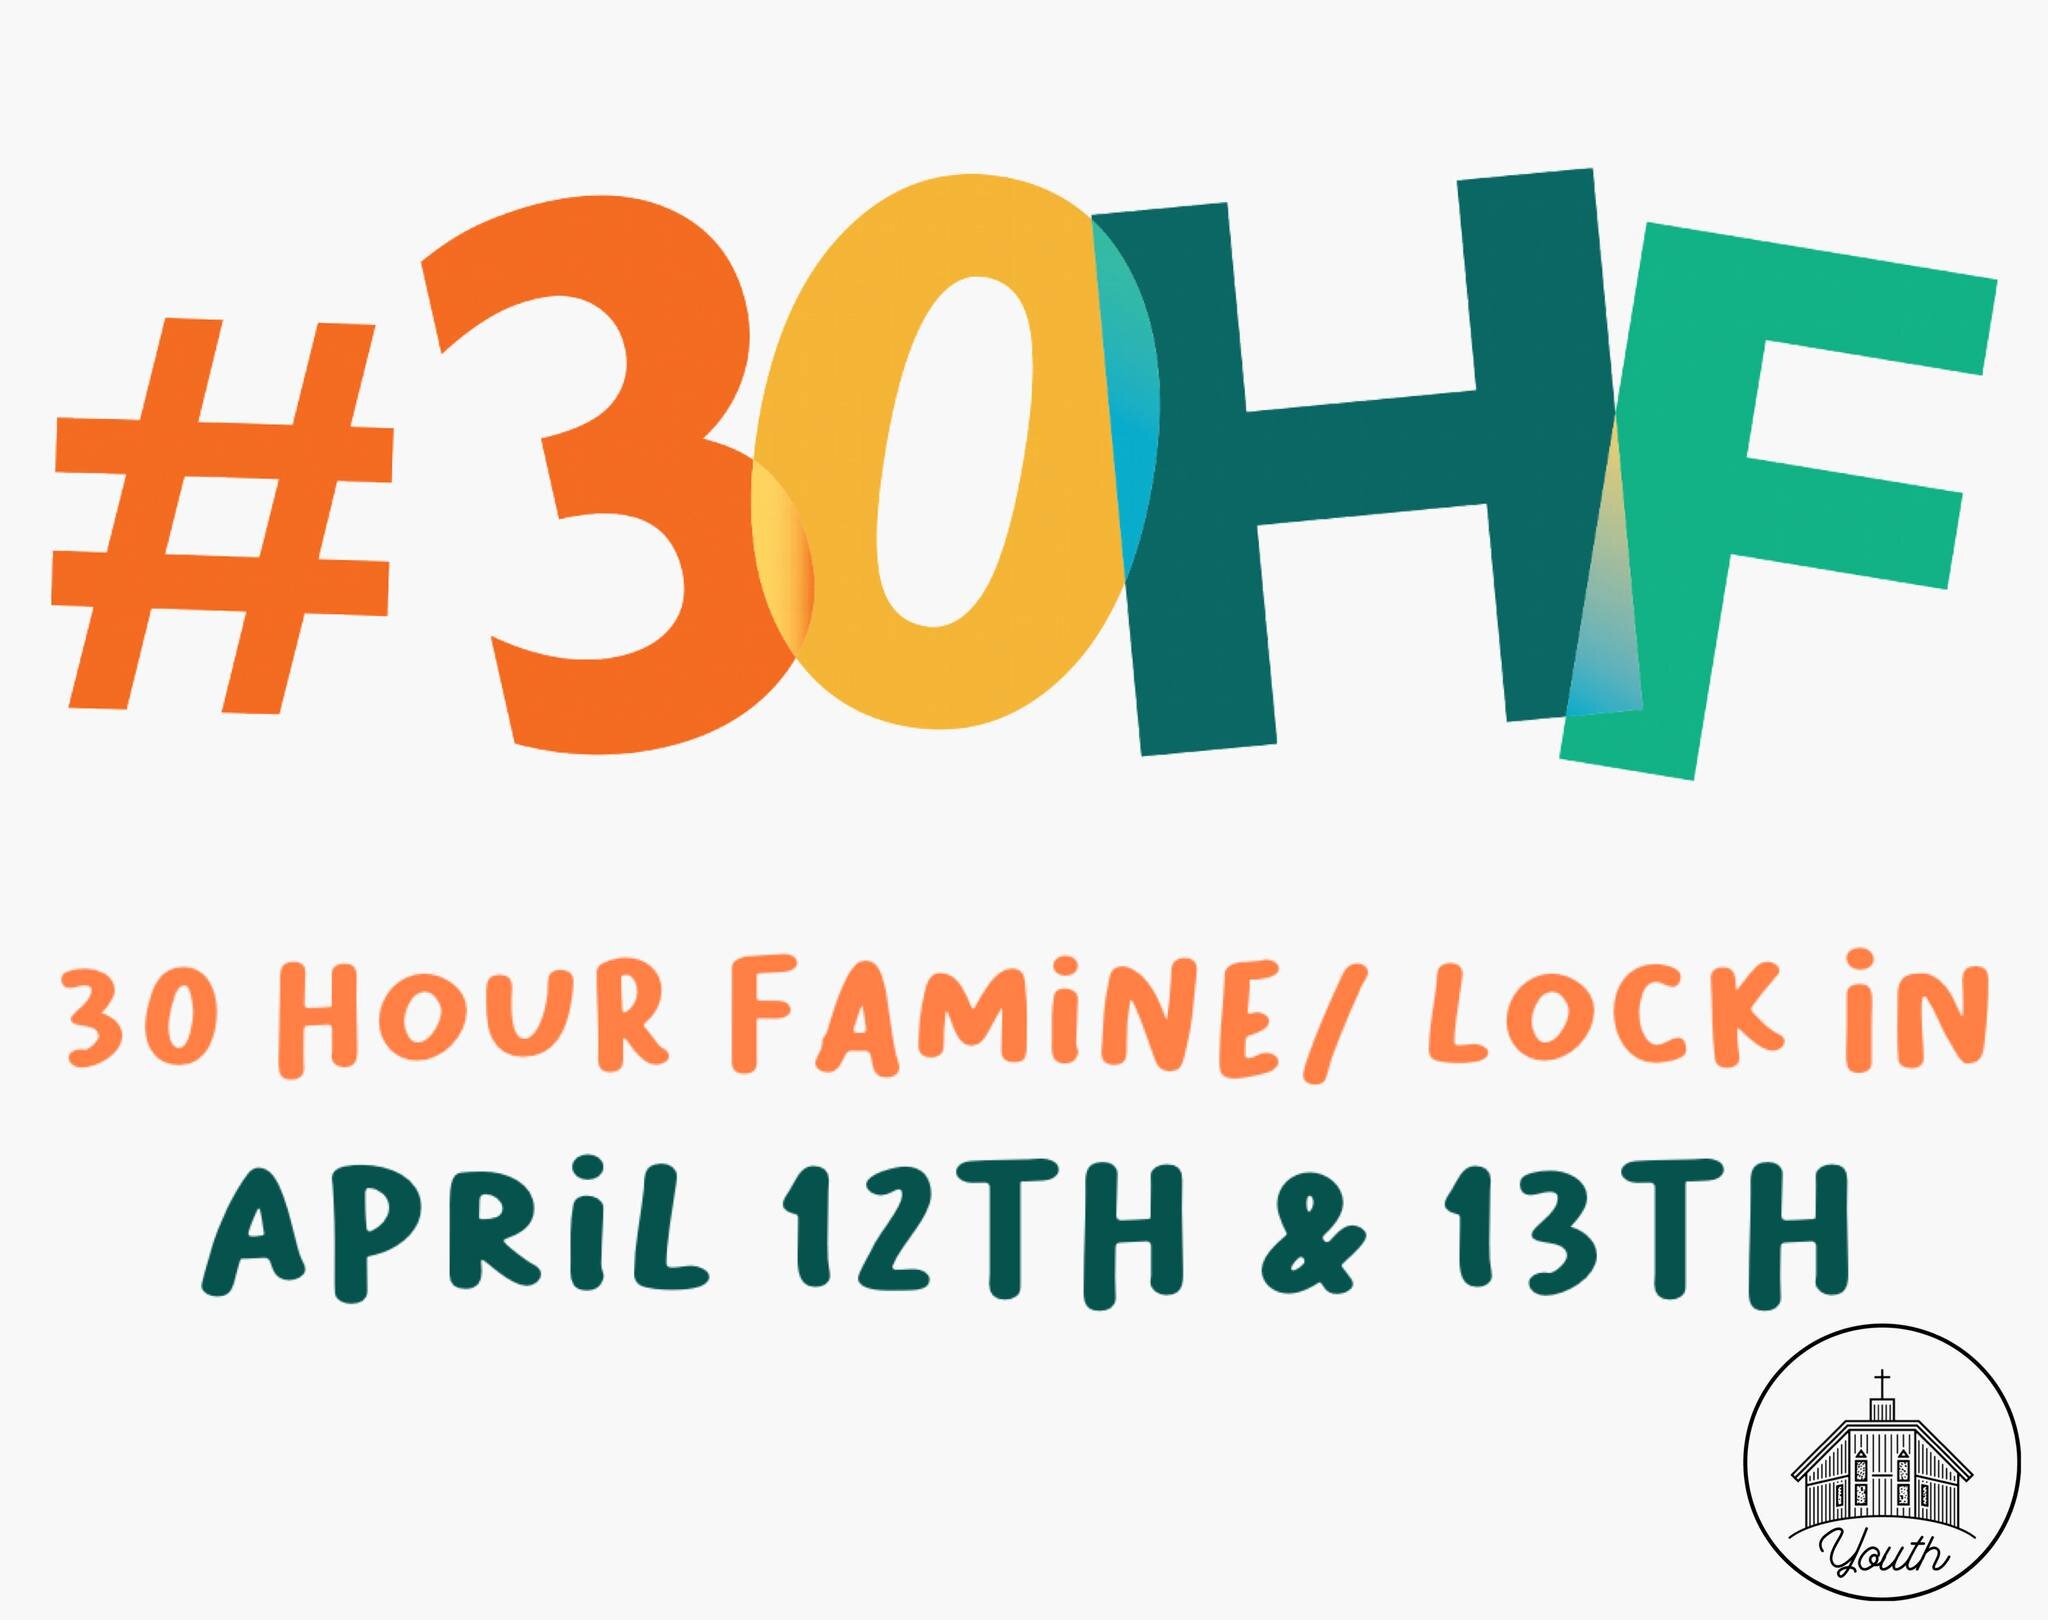 Hillcrest Youth 30 Hour Famine is the opportunity for teens to practice the spiritual discipline of fasting in a community setting. Together we will be fasting for 30 hours together as we learn how to make an impact in our local community by eliminat